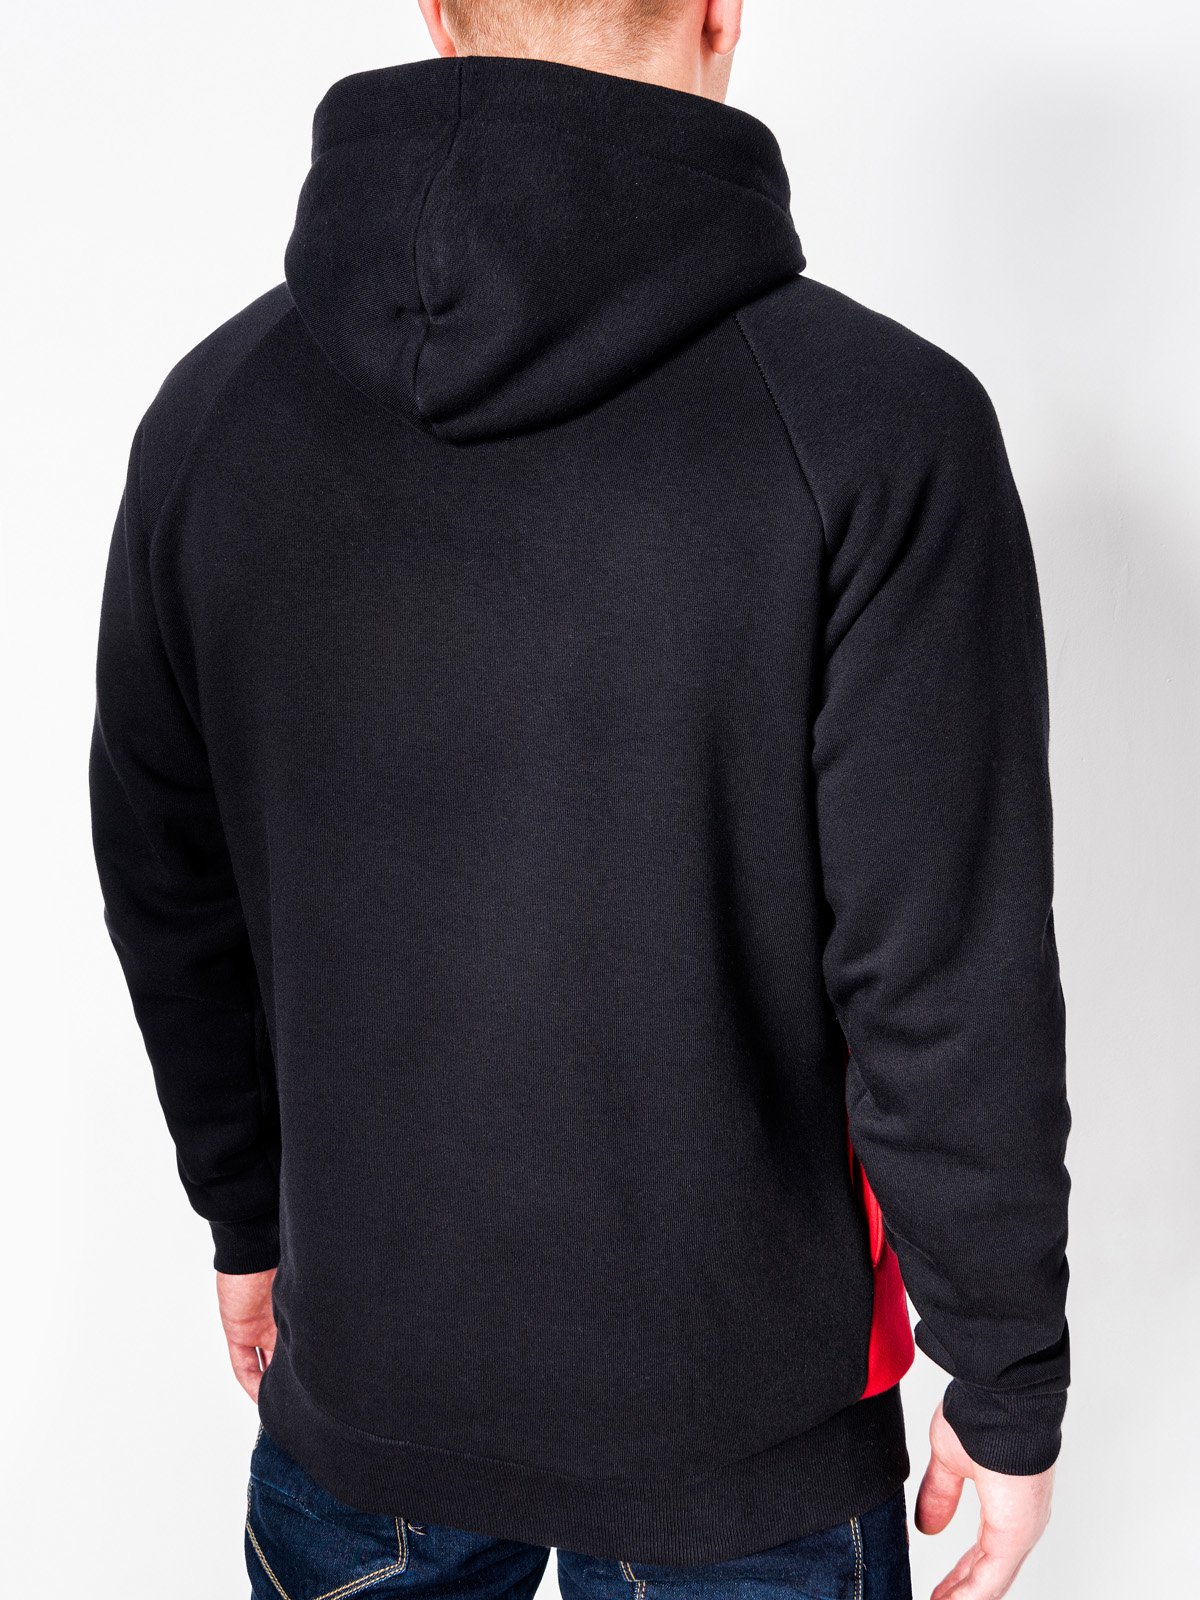 Men's hoodie MIGUEL - red | MODONE wholesale - Clothing For Men